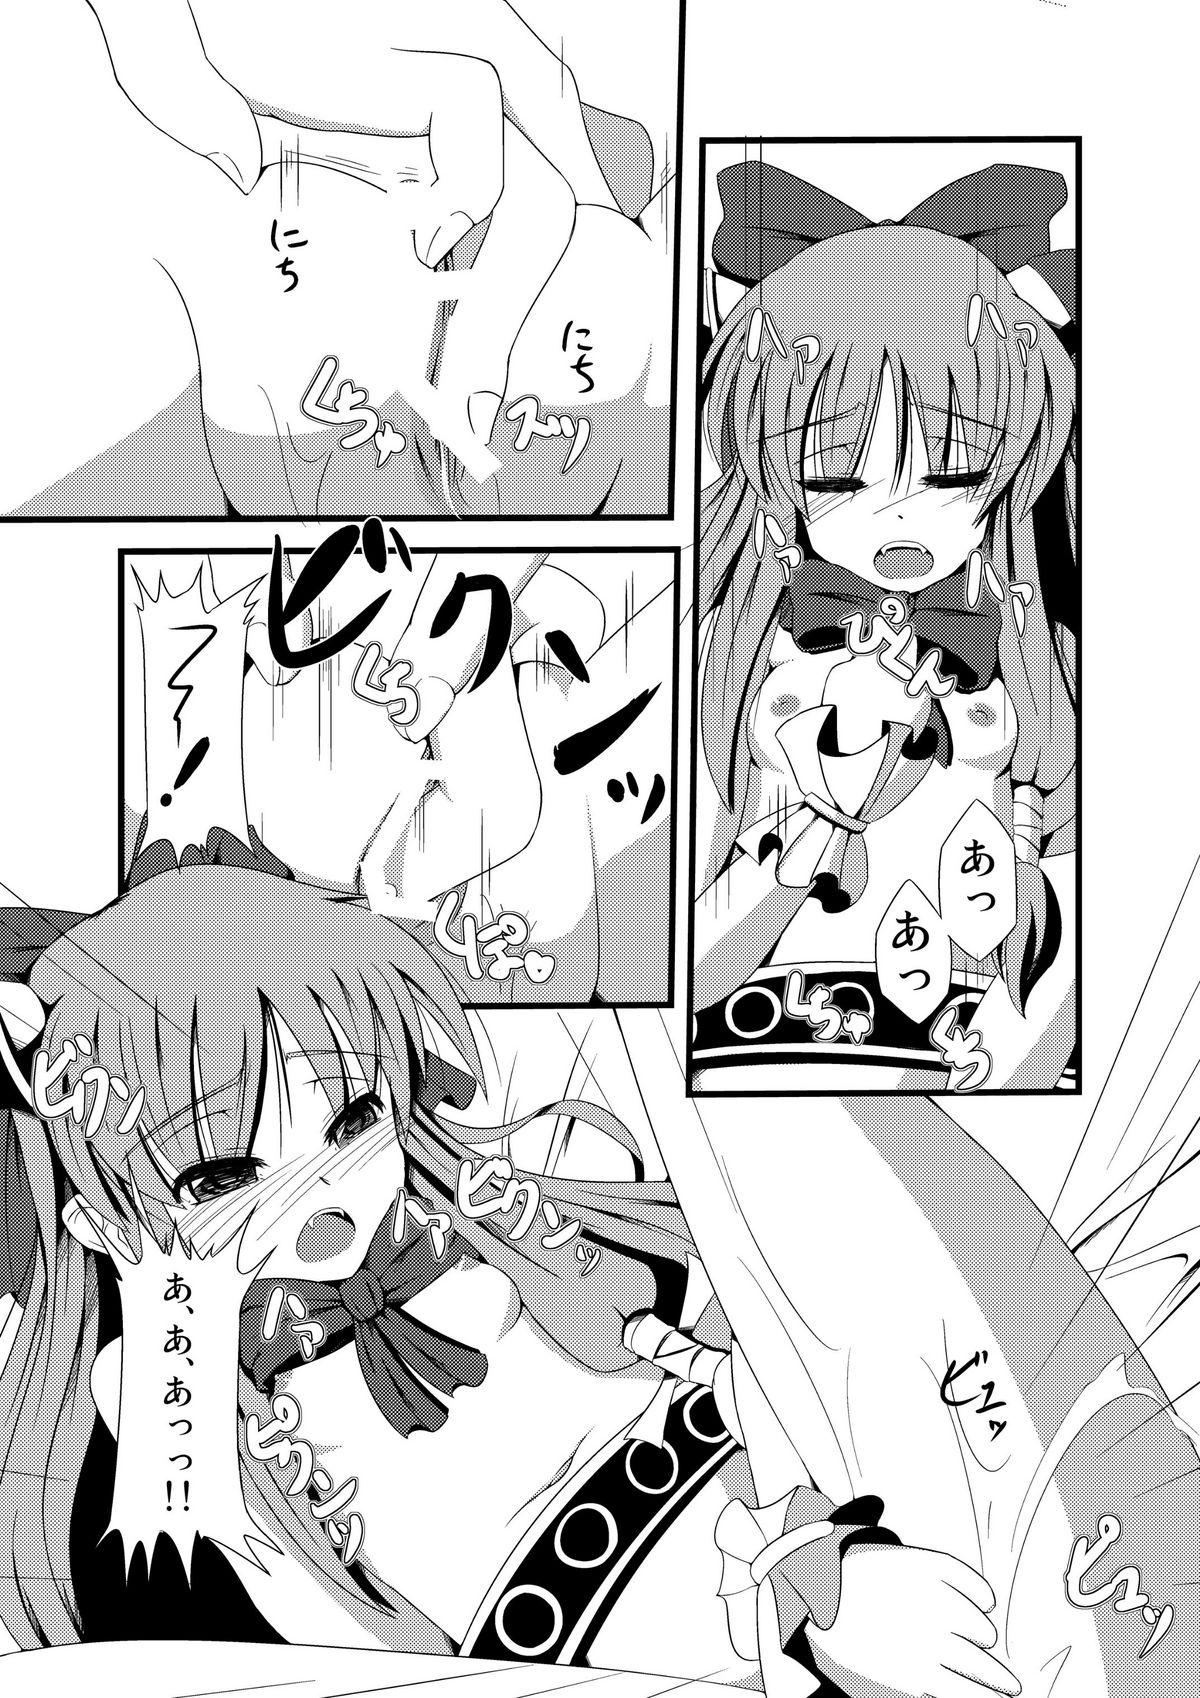 Celebrity Porn ] Oni - Touhou project Blowjobs - Page 11